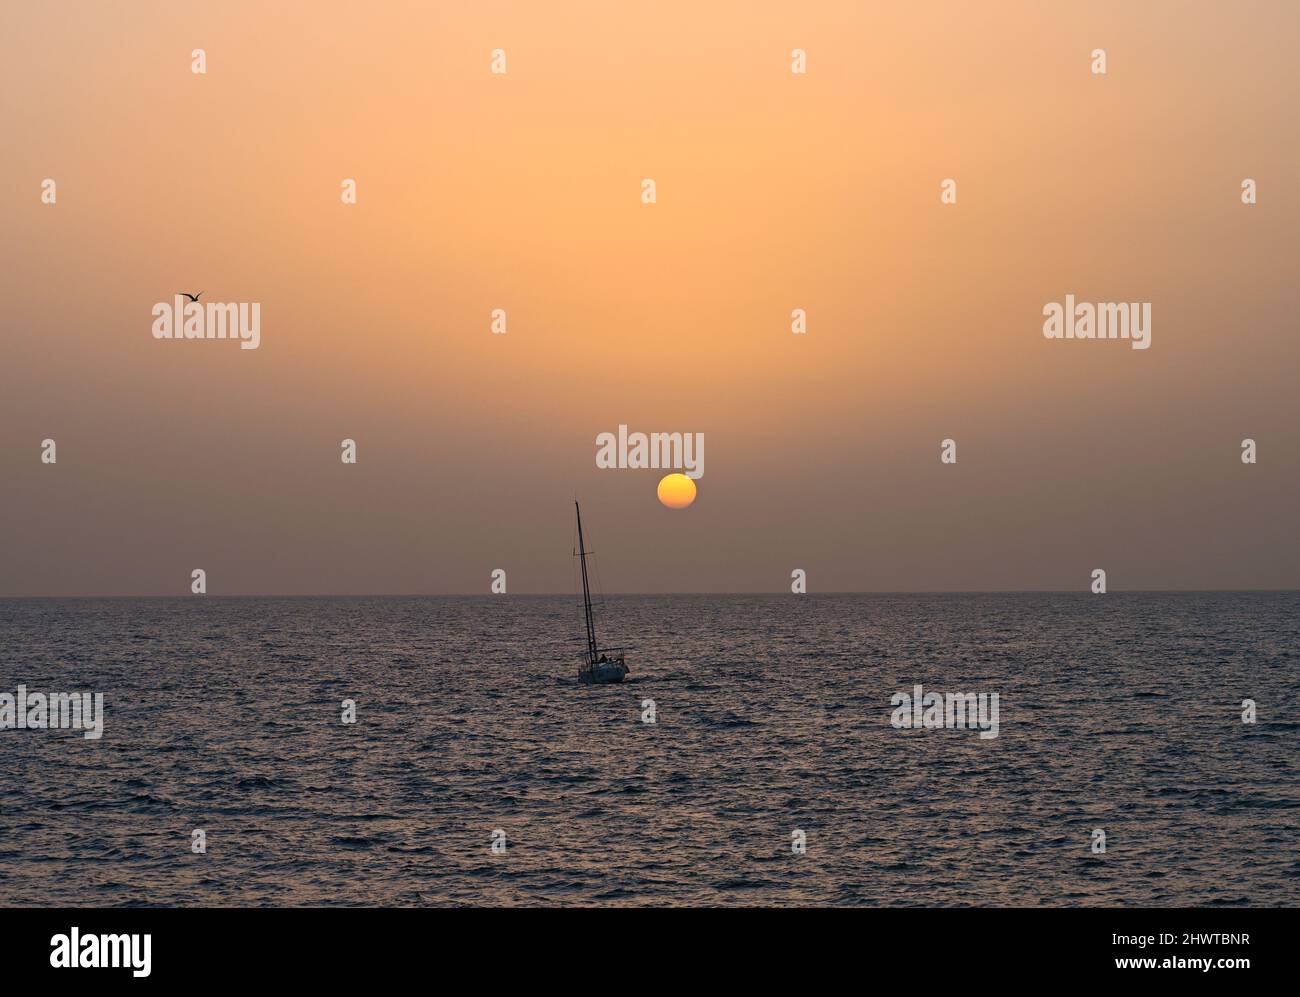 A tranquil distant sunset on a warm February Day over the Atlantic Ocean at dusk with a sail boat crossing the horizon with a distant seagull Stock Photo